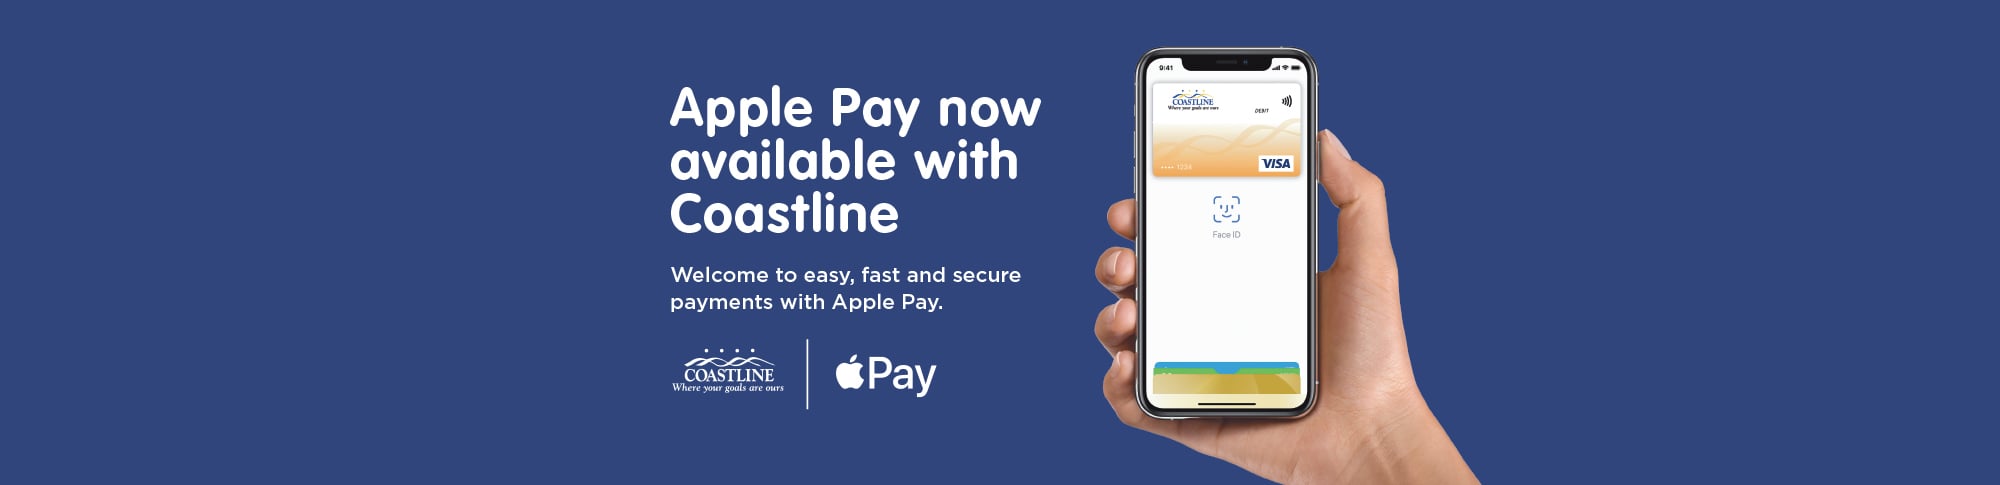 Apple Pay now available with Coastline